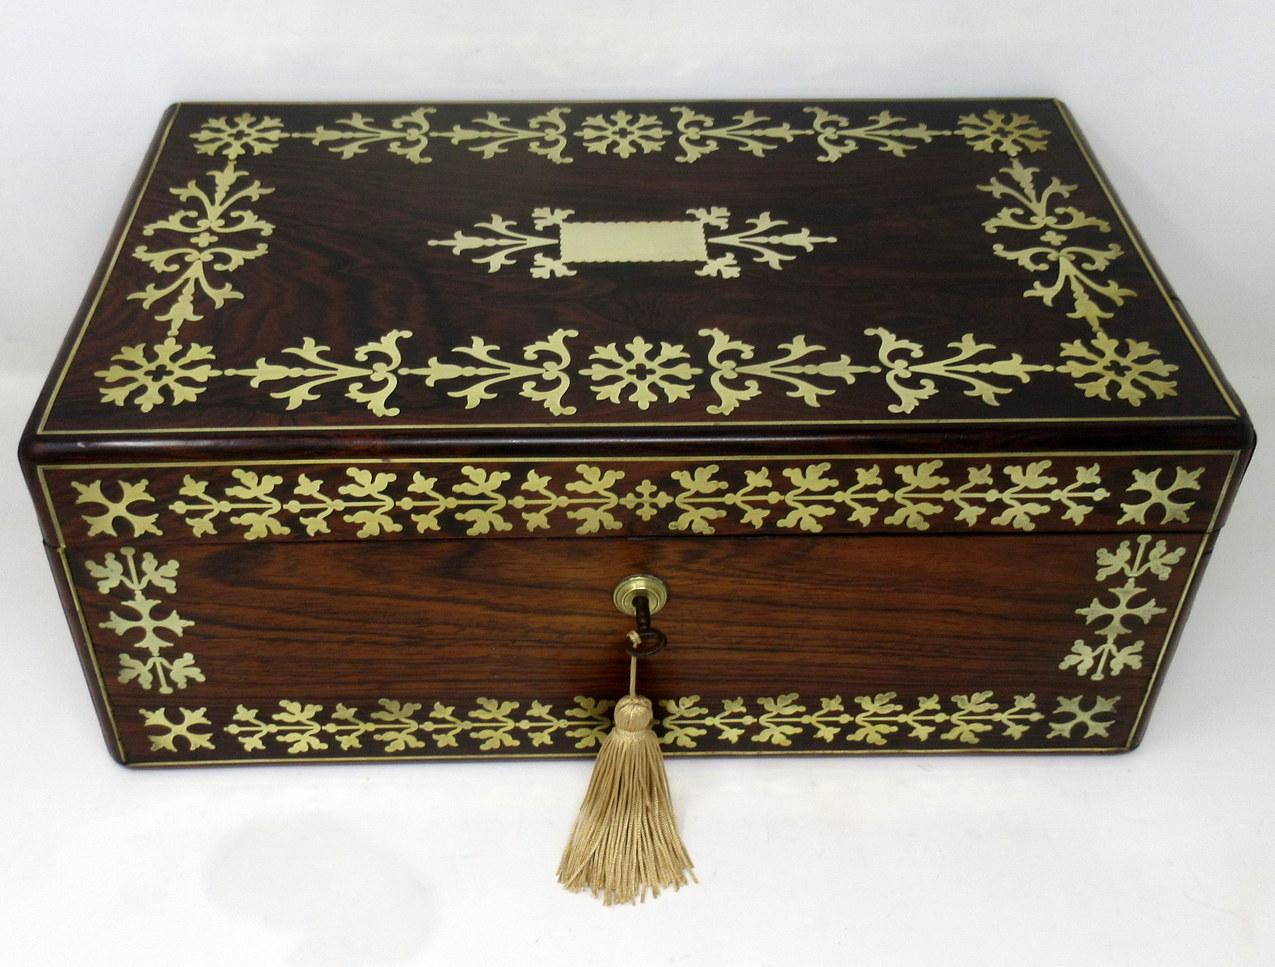 An exceptionally fine quality English well figured Mahogany ladies or gents travelling writing slope of outstanding quality, with lavish brass inlay decoration, twin polished brass carry handles, early 19th century, complete with original fitted